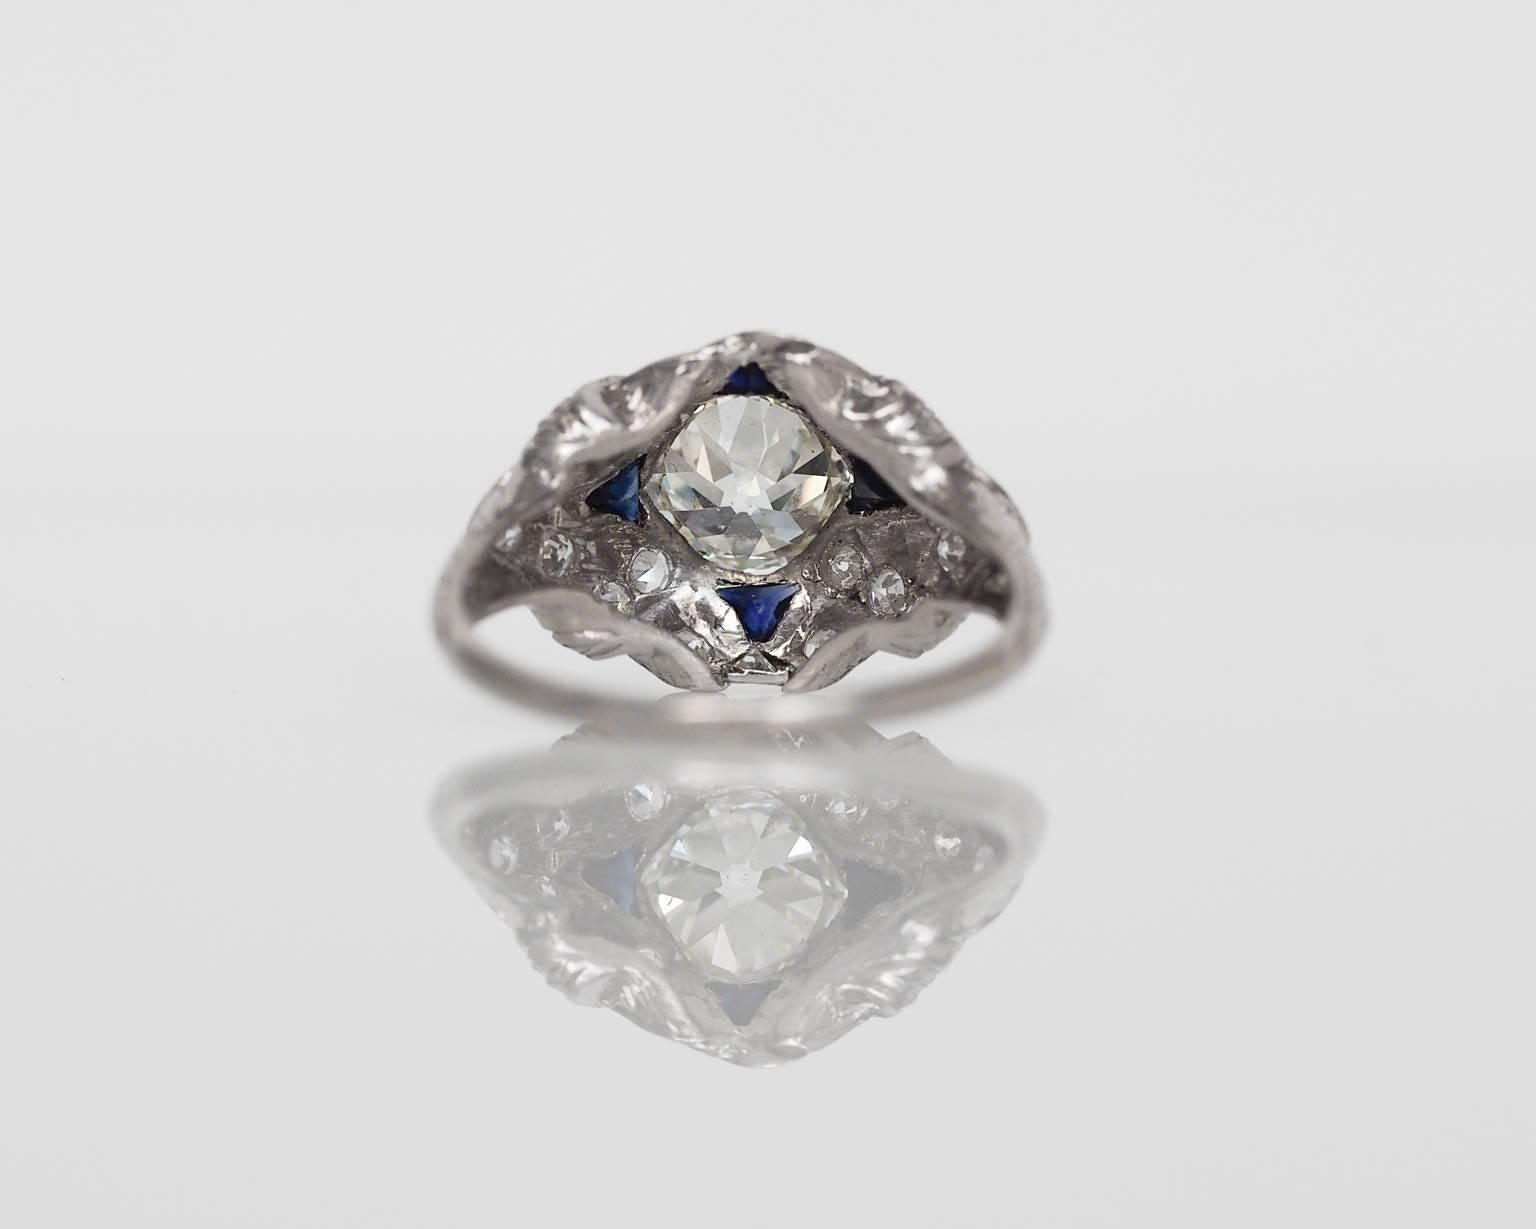 1930s Art Deco 1.28 Carat GIA Certified Old European Diamond Engagement Ring For Sale 2